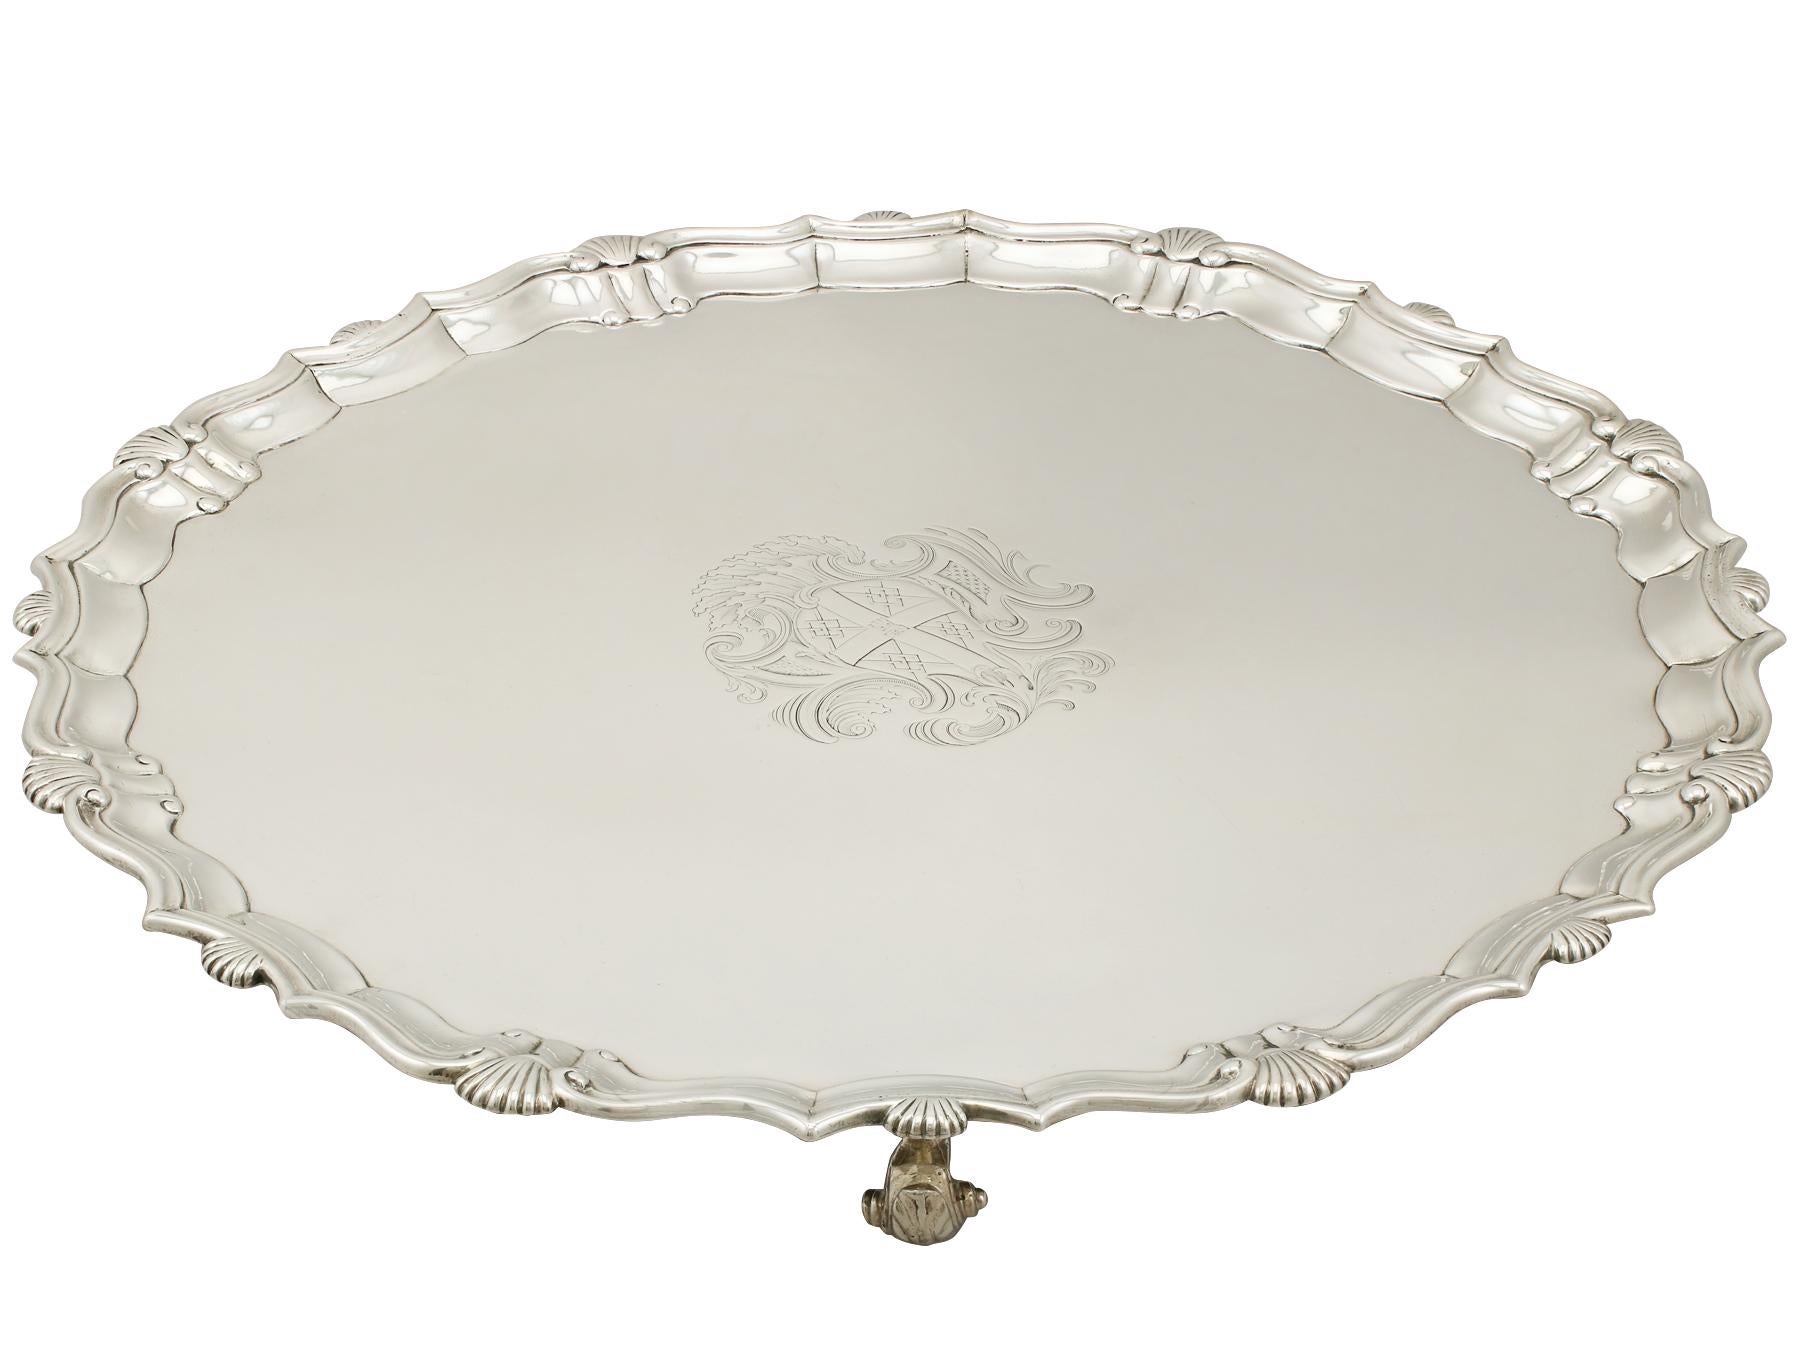 A fine and impressive, large antique Georgian English sterling silver salver made by John Tuite; an addition to our dining silverware collection.

This fine antique George II sterling silver salver has a plain circular shaped form.

The surface